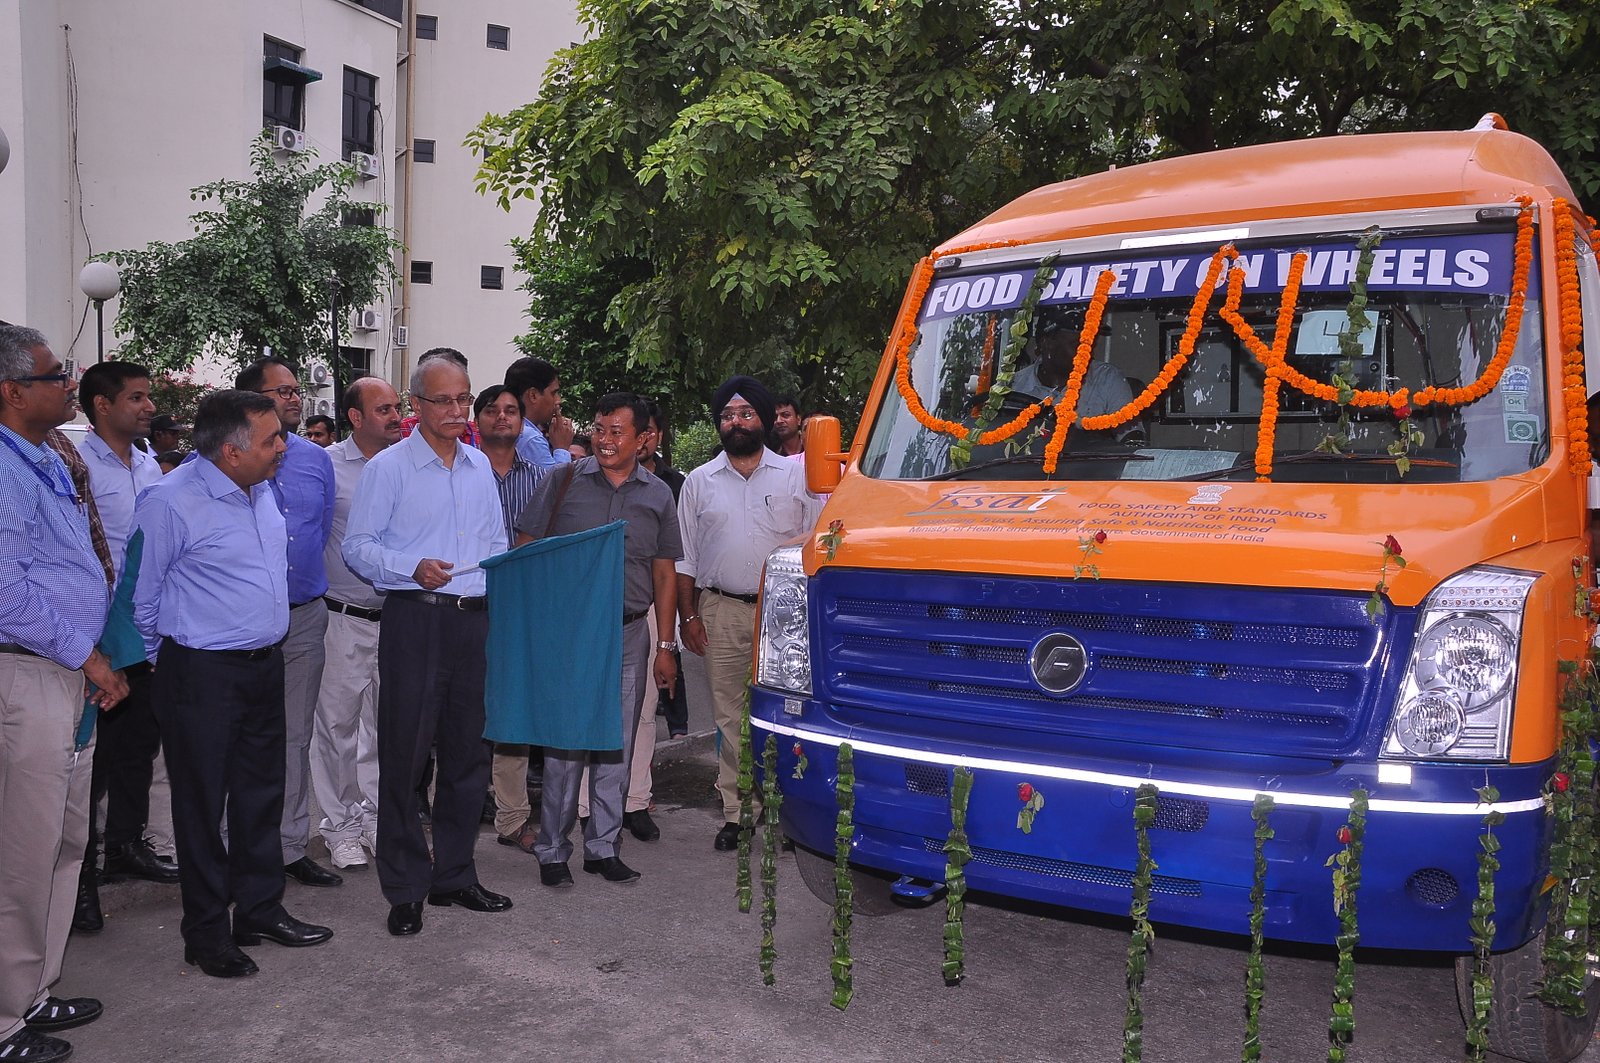 fssai-unveils-food-safety-on-wheels-to-push-food-testing-system